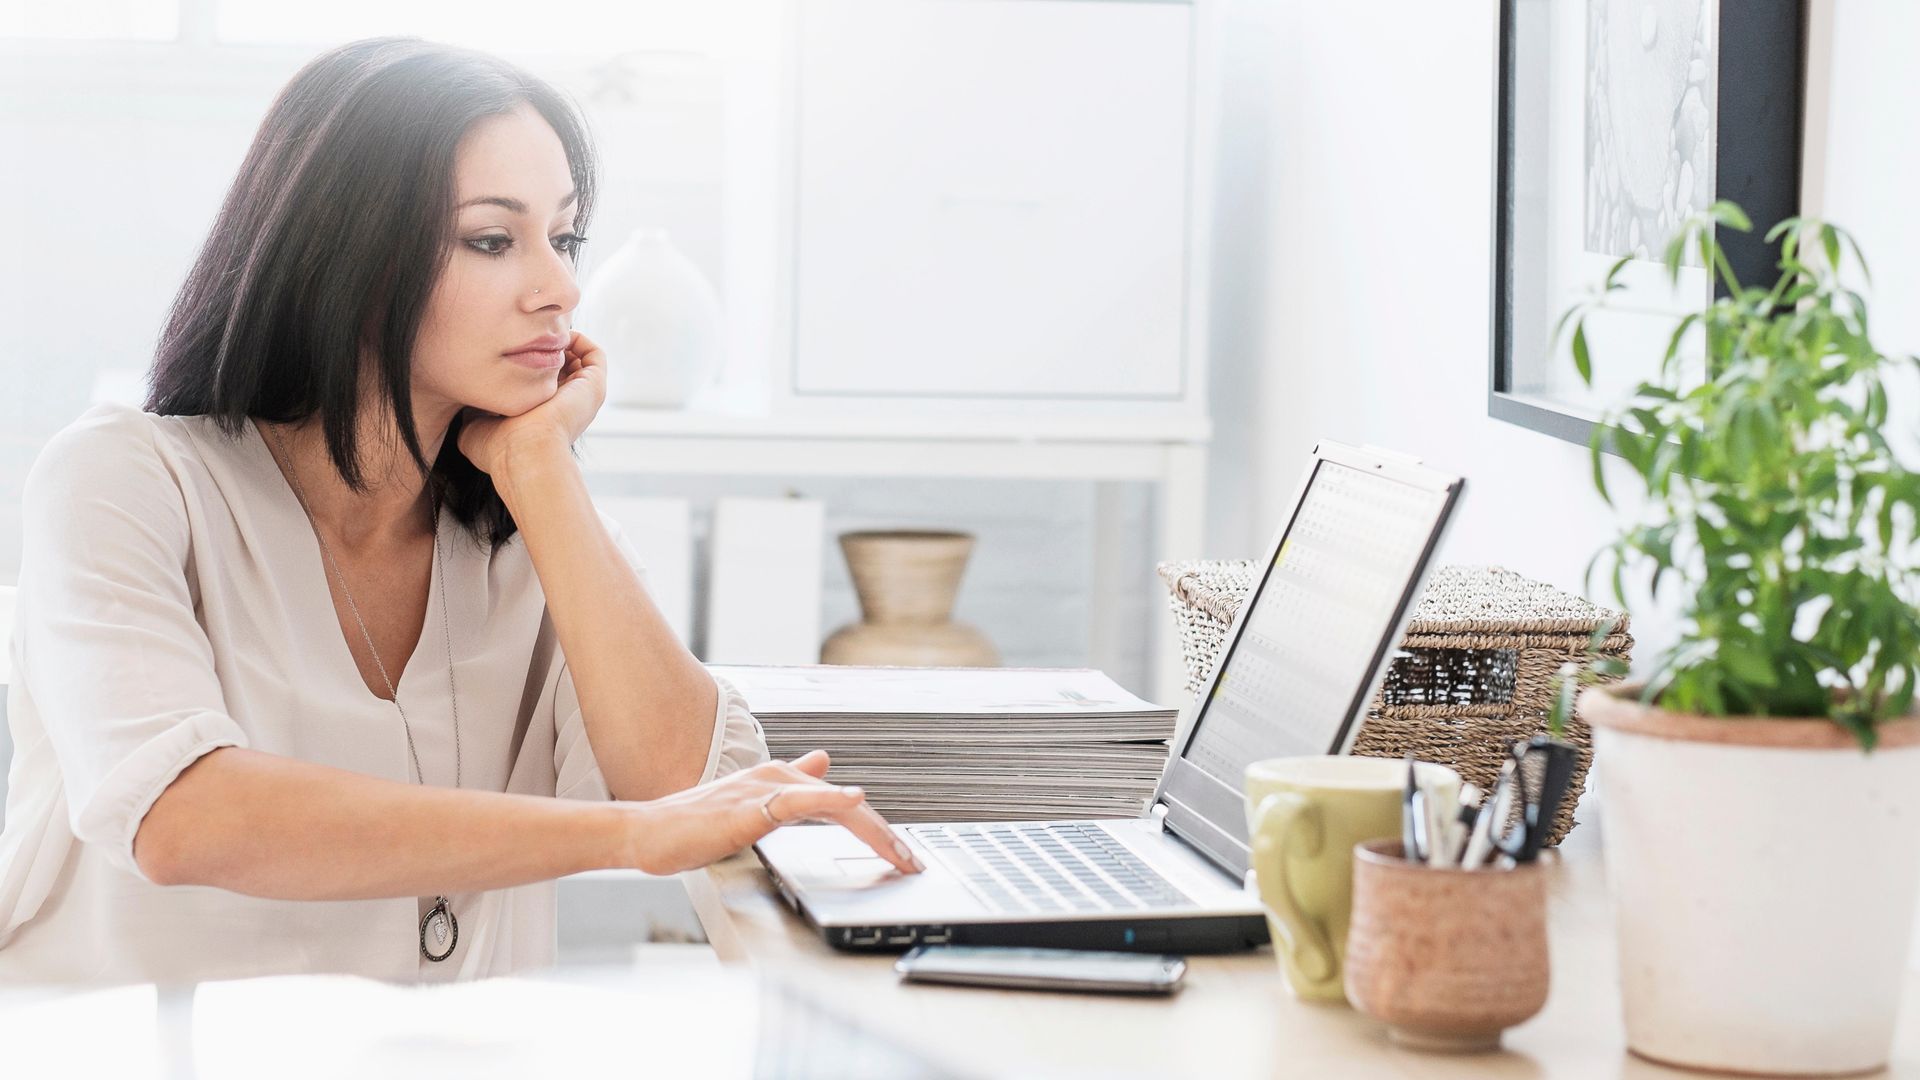 Stock image of woman sitting at desk with laptop